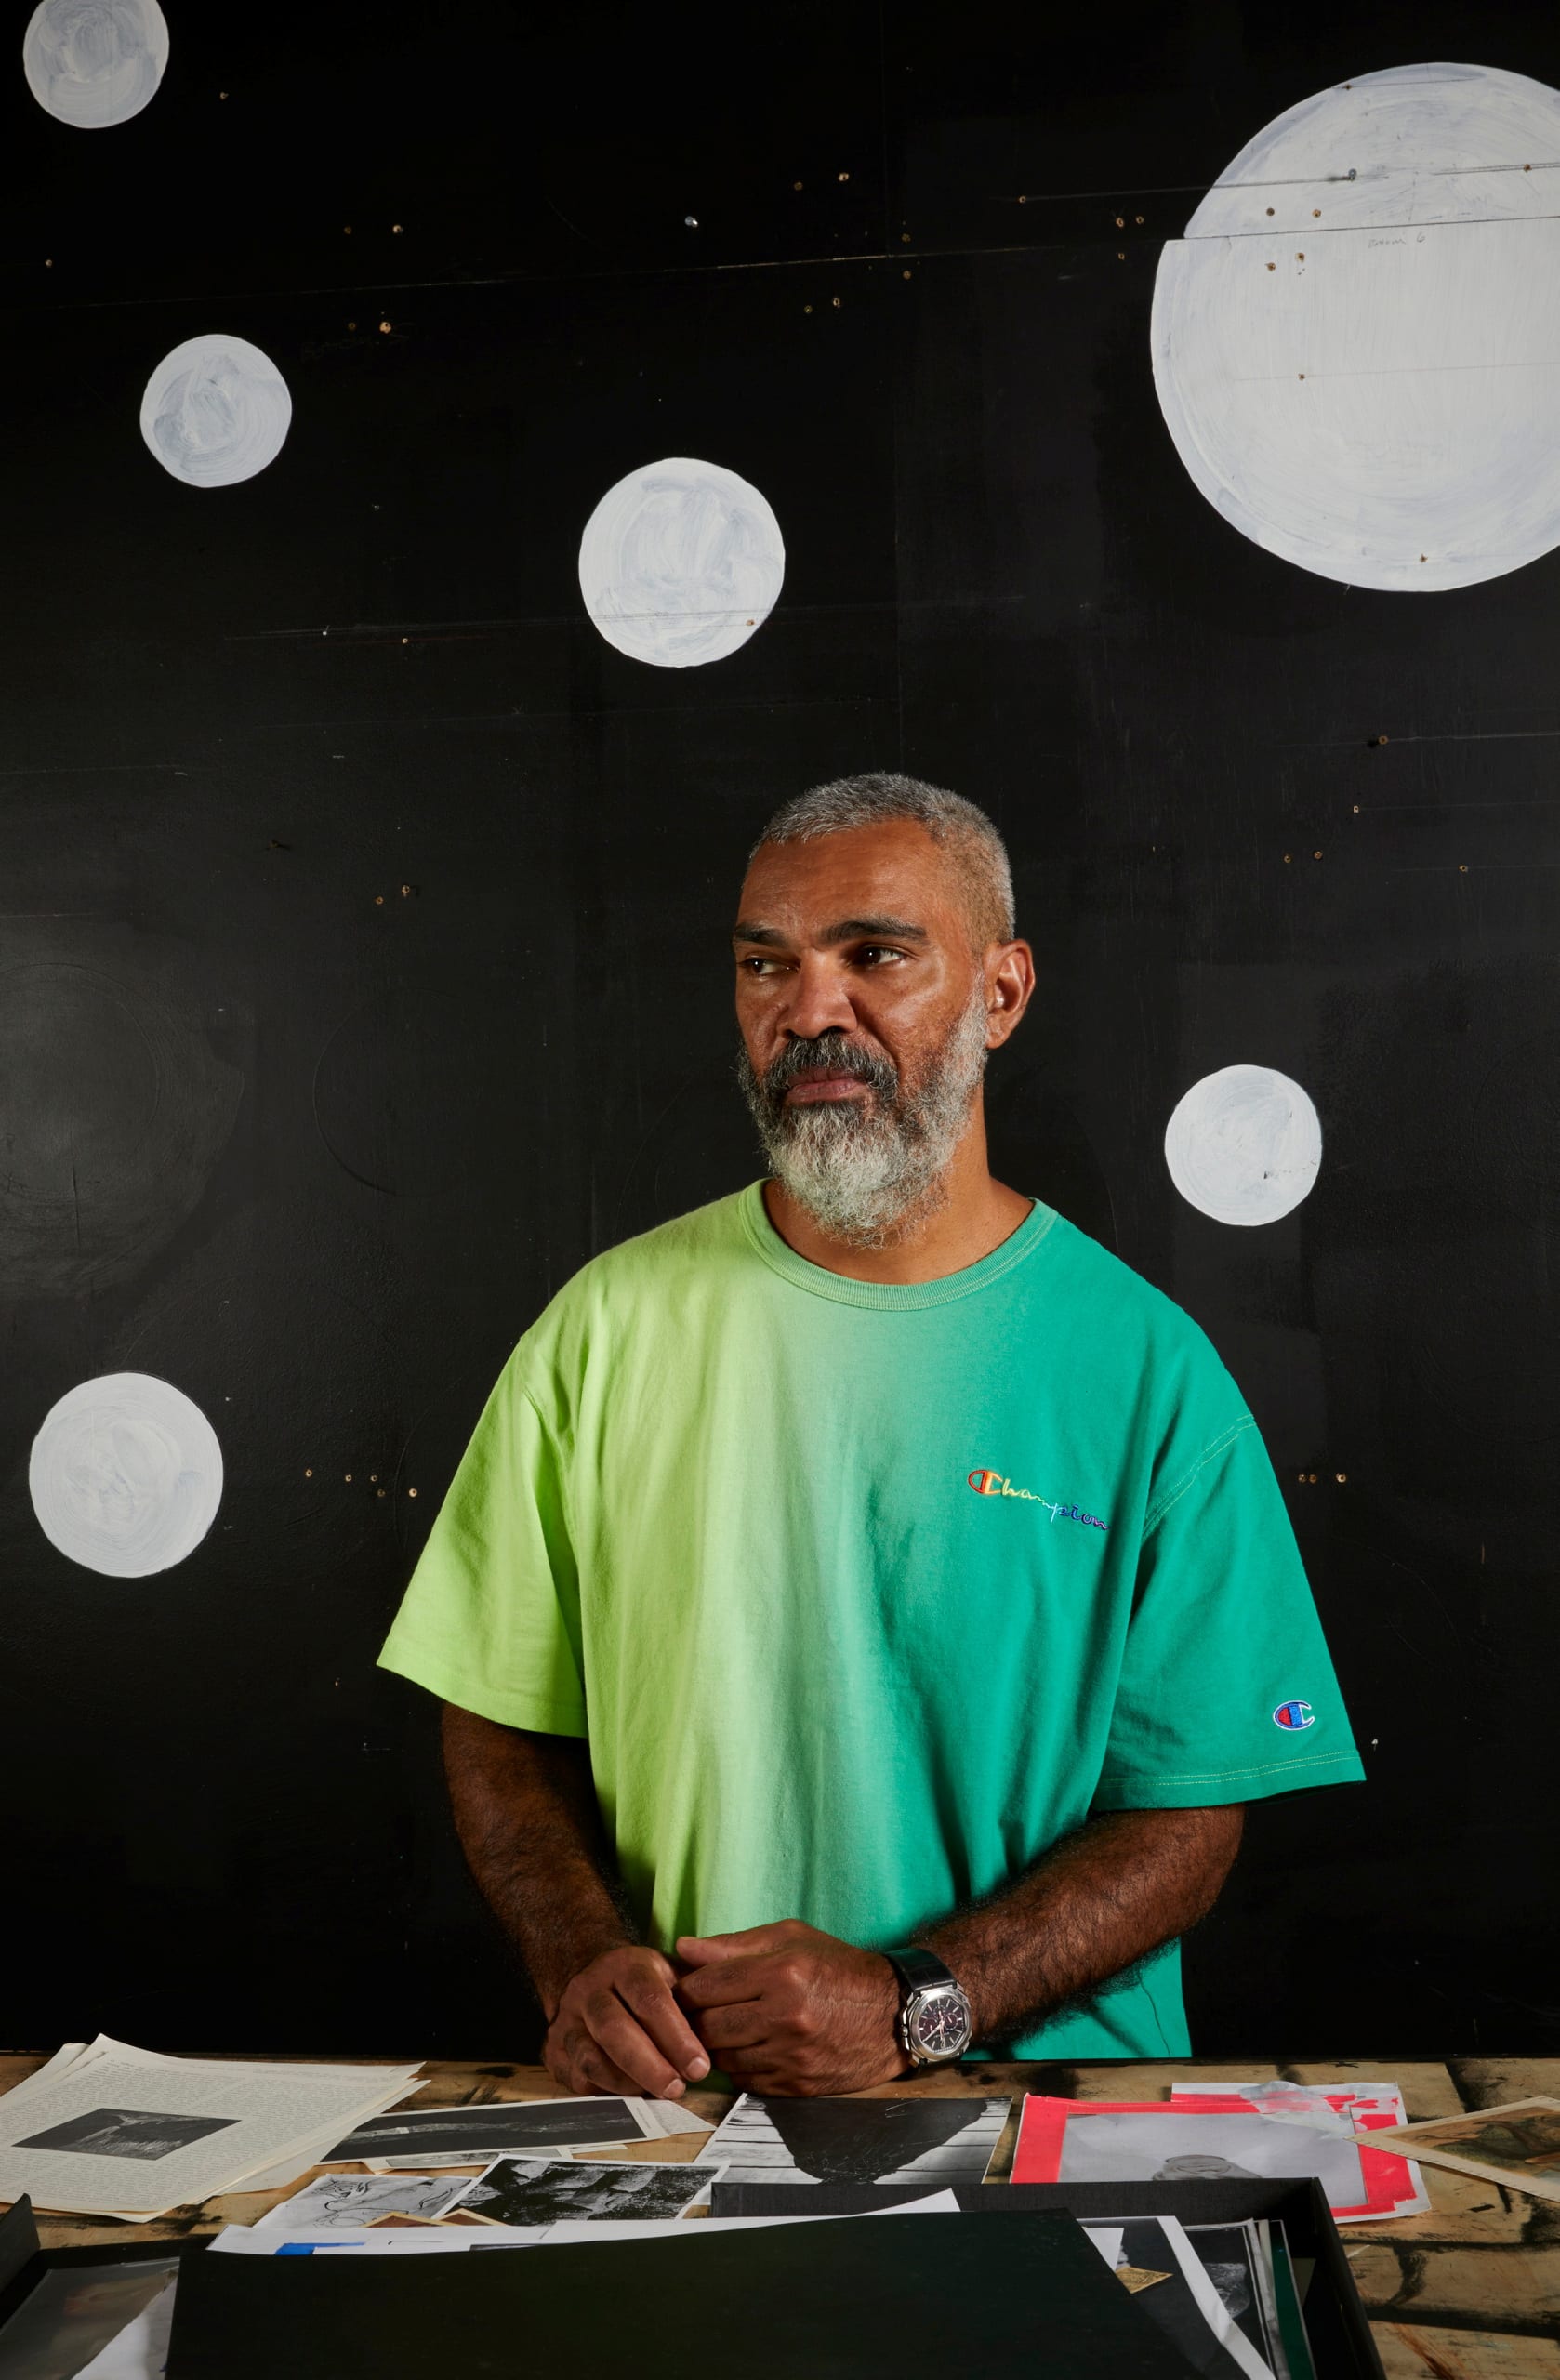 Daniel Boyd, 2022. Photograph by Jenni Carter for the Art Gallery of New South Wales.